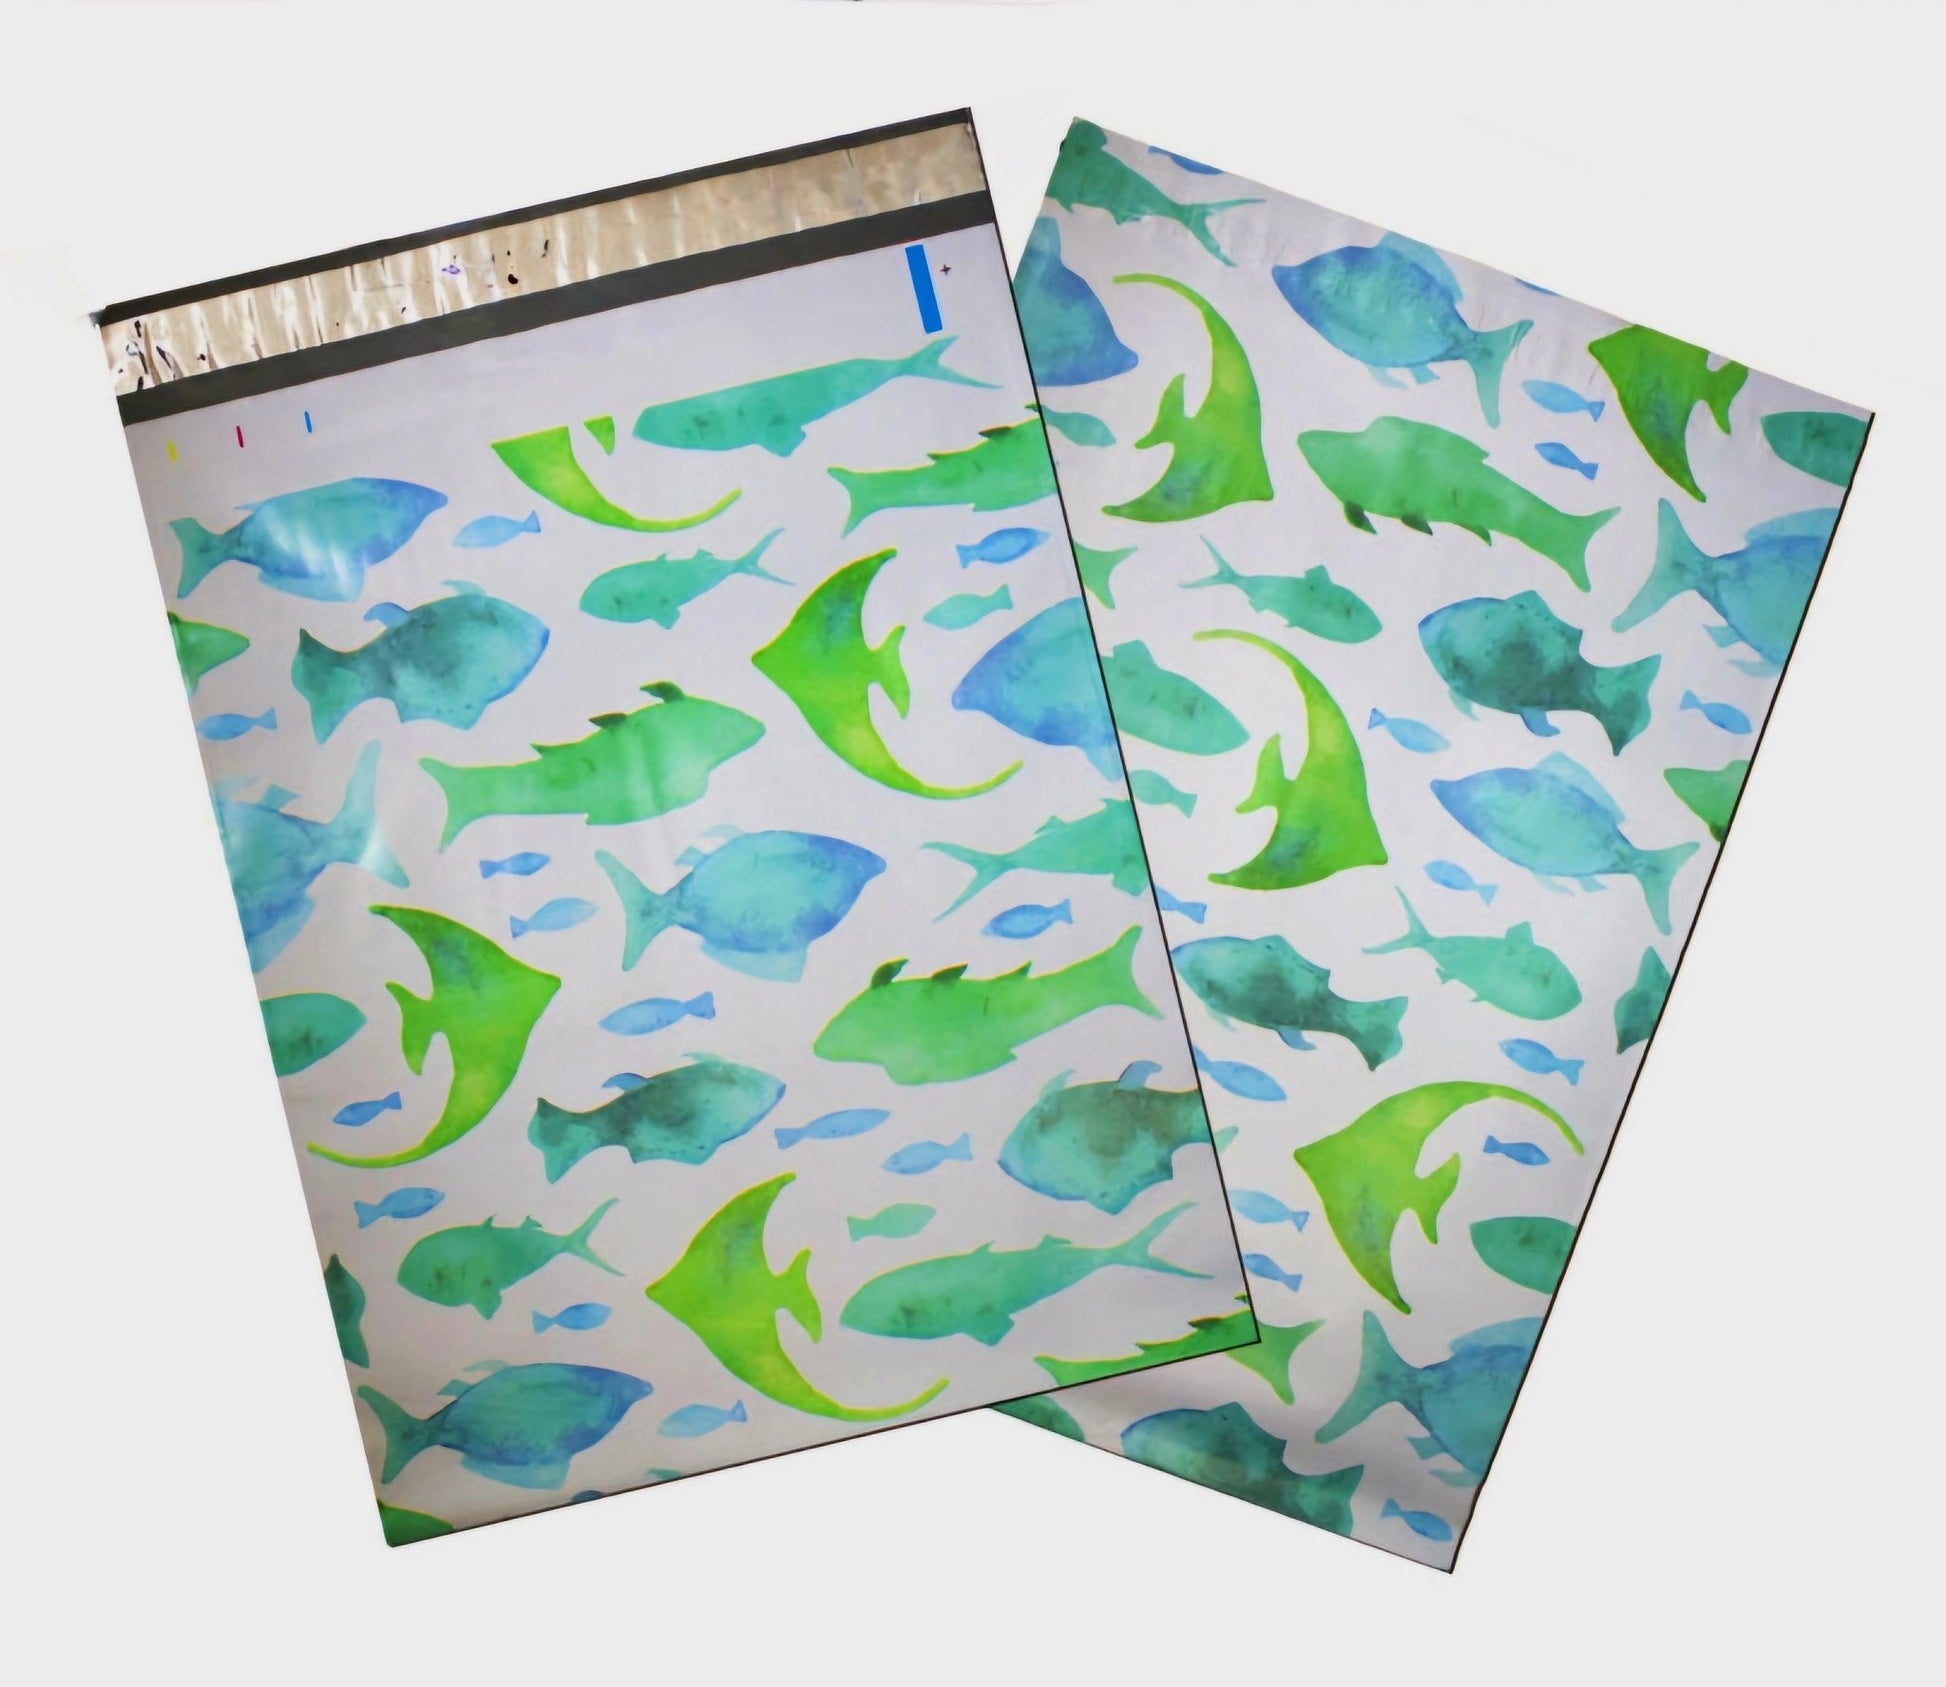 Fish Poly Mailers Size 10x13 Colorful Shipping Bags - Shipping In Style